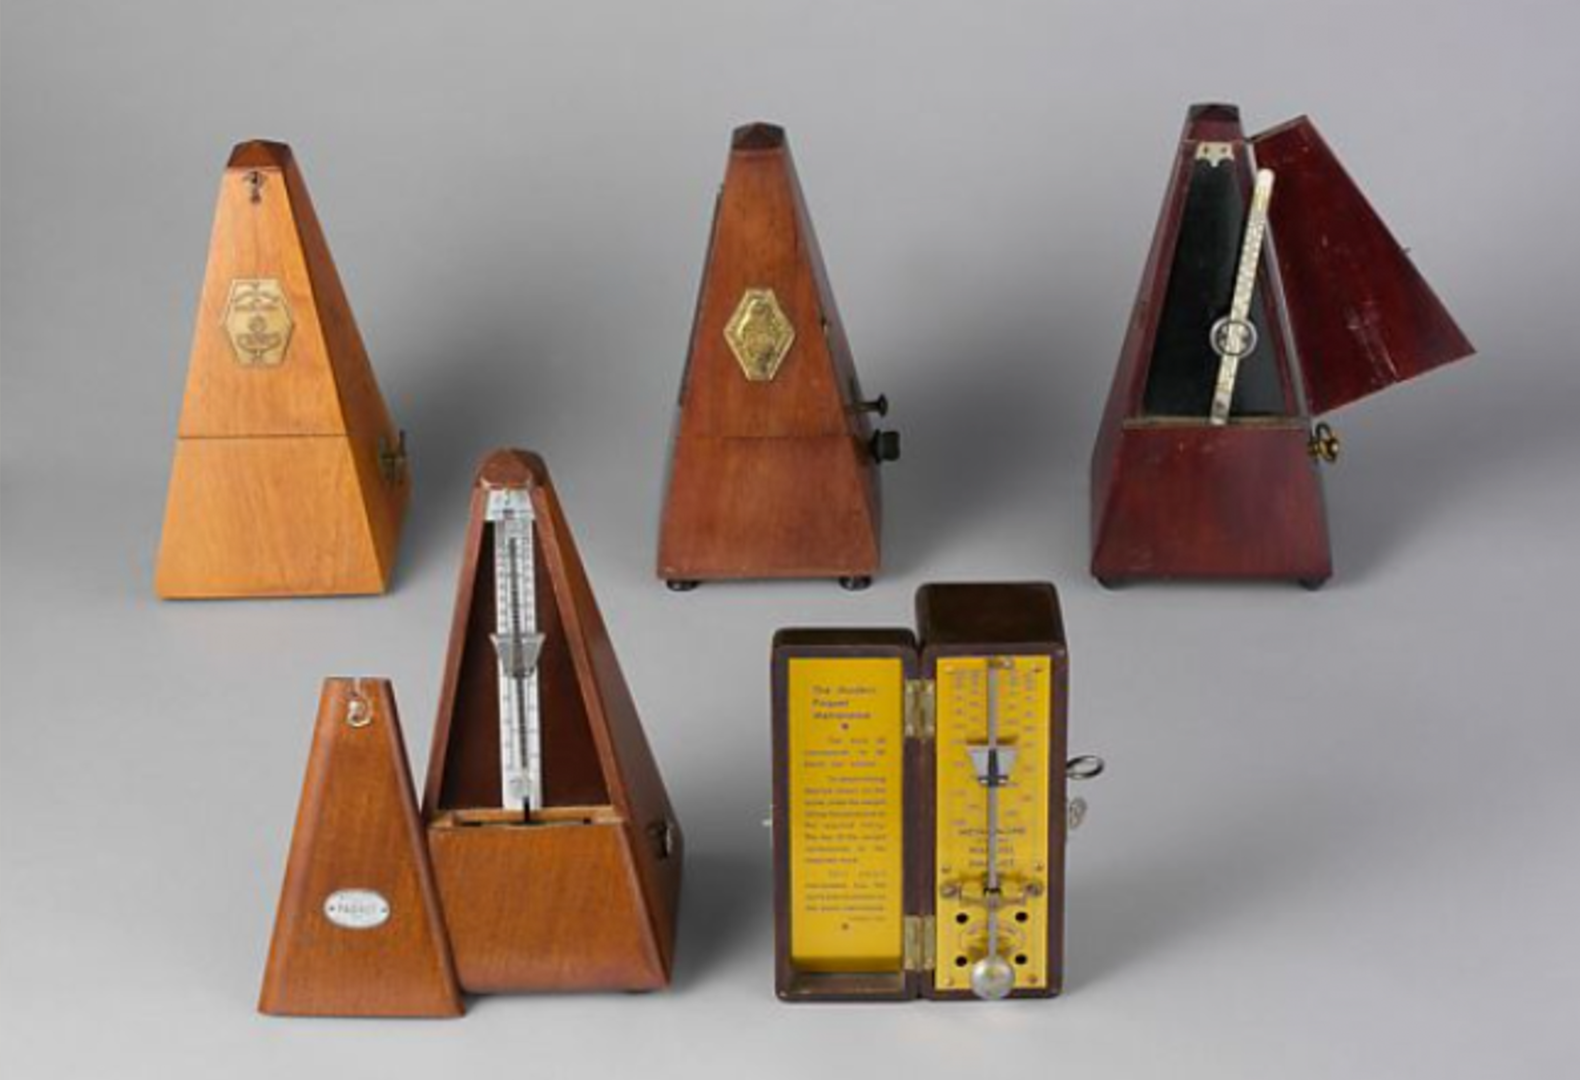 A group of metronomes photographed against a gray background